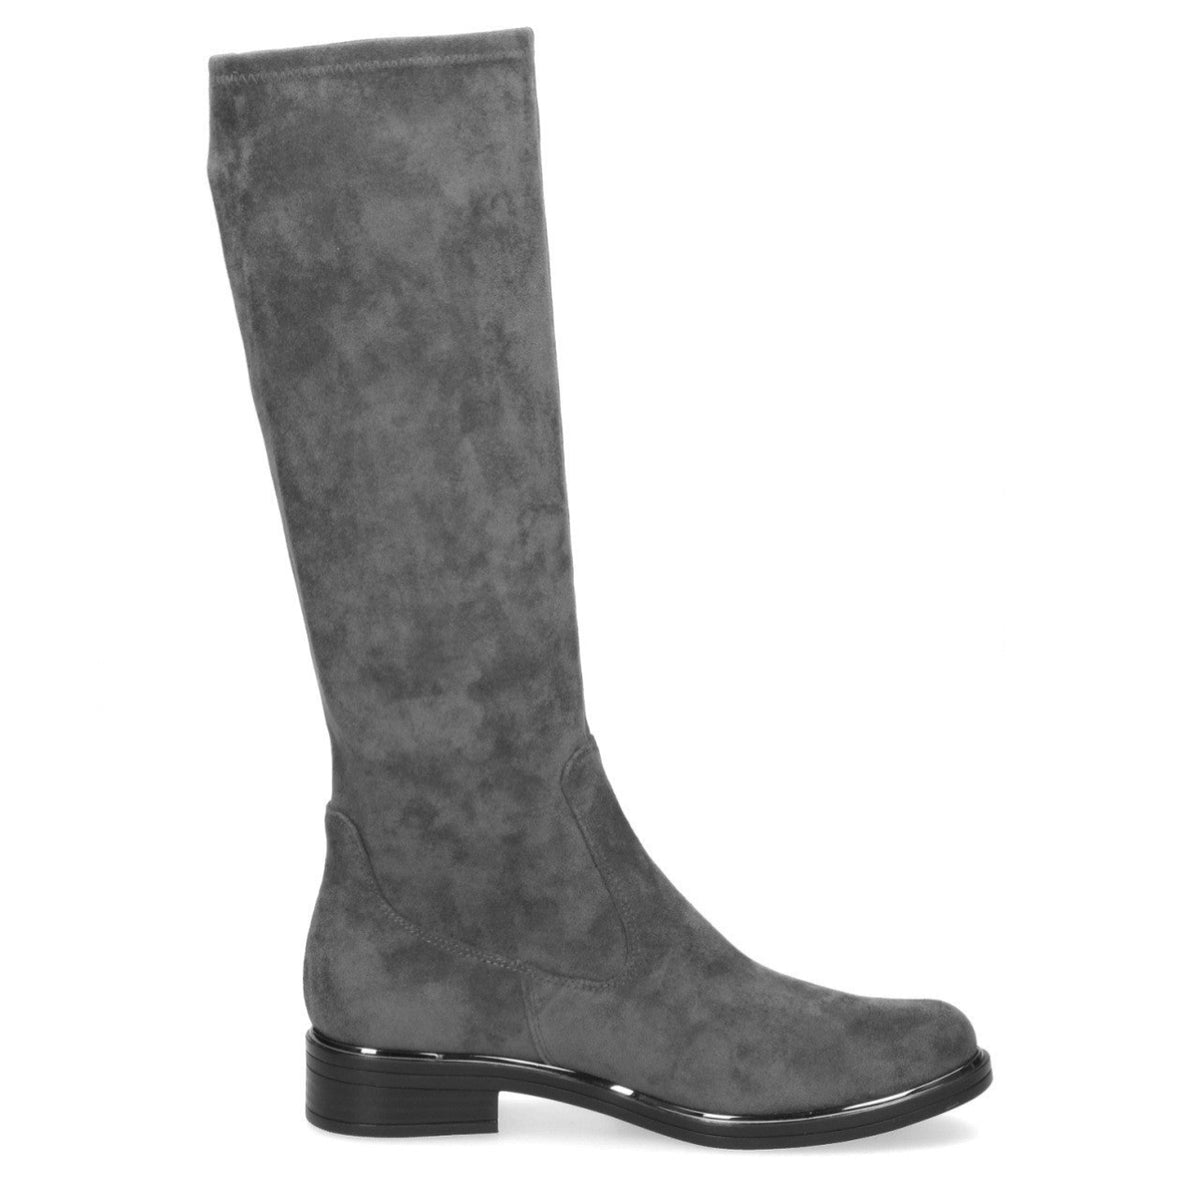 Caprice - 25512 Grey Stretch Knee High Boot